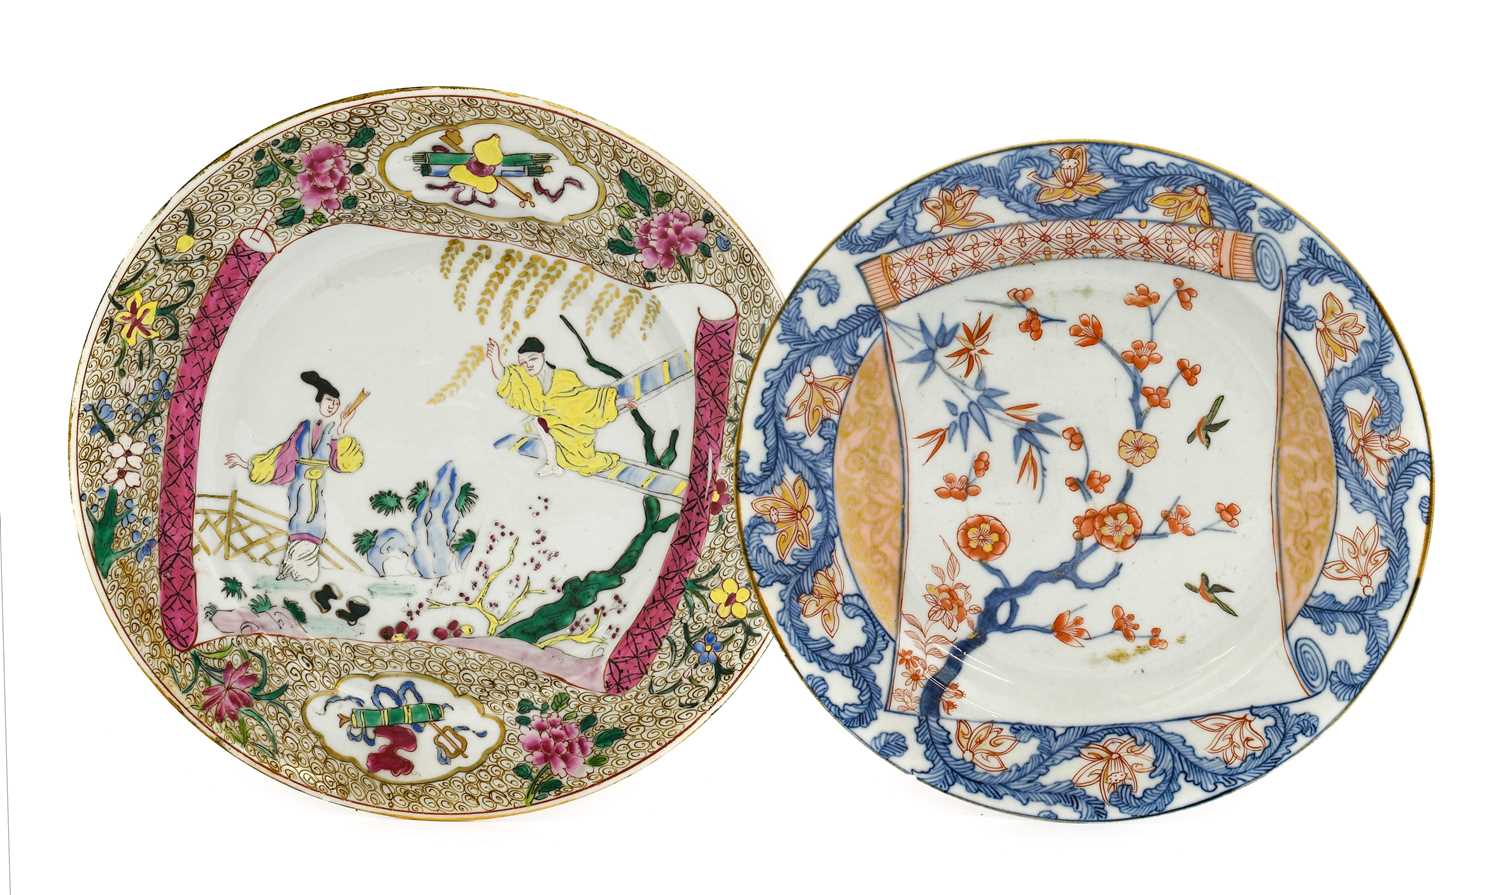 A Samson of Paris Porcelain Plate, late 19th century, painted in Chinese famille rose style with